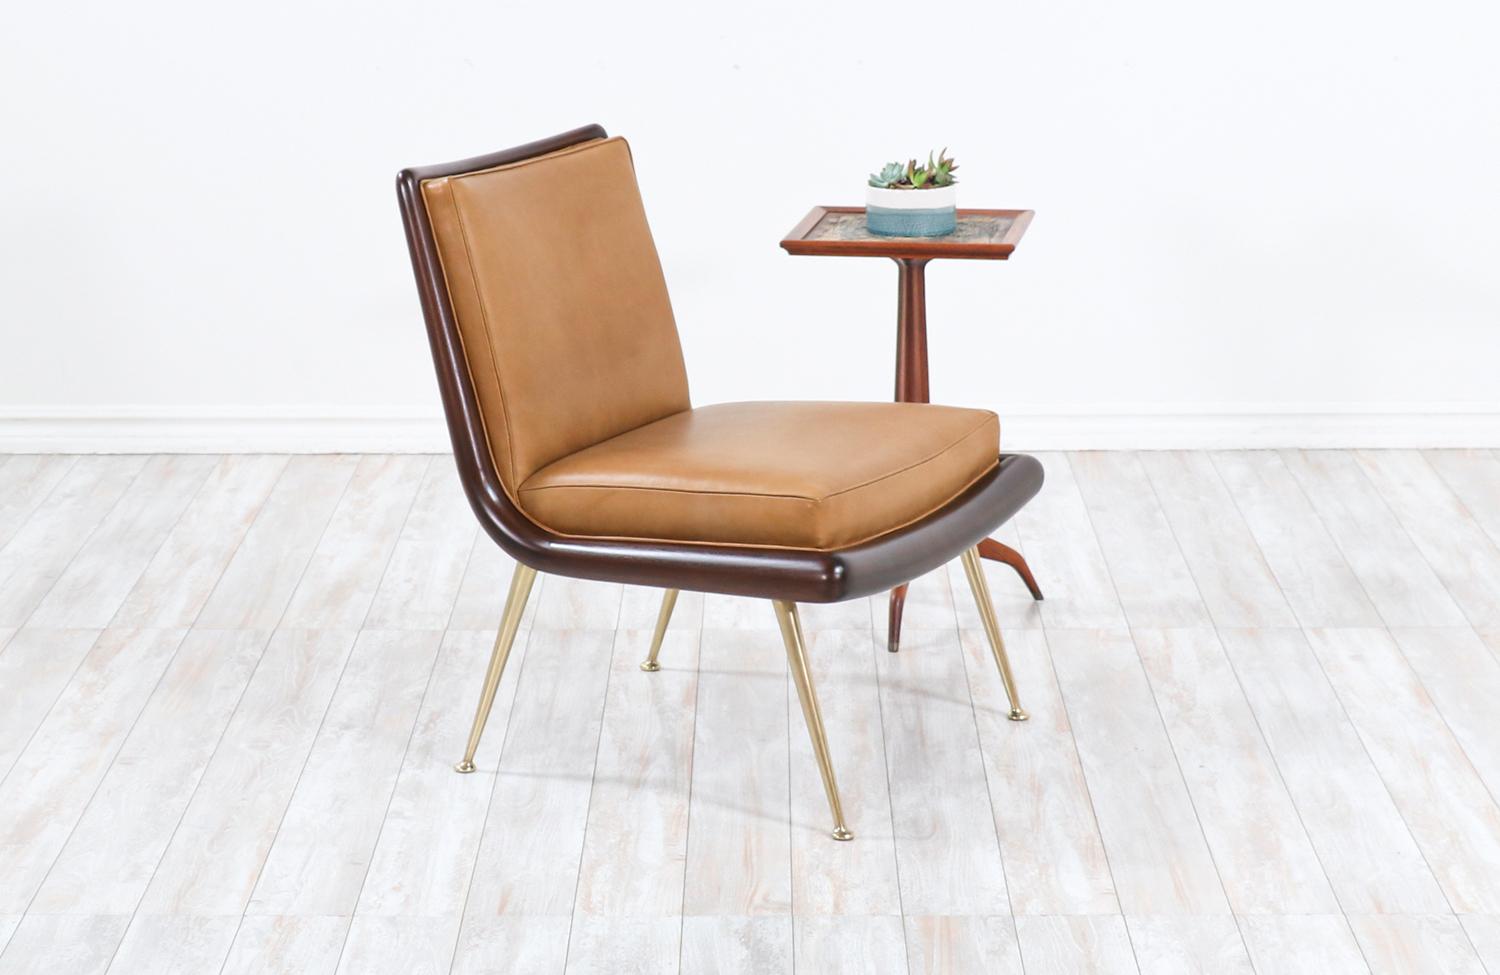 T.H. Robsjohn-Gibbings brass accent lounge chair for Widdicomb.

________________________________________

Transforming a piece of Mid-Century Modern furniture is like bringing history back to life, and we take this journey with passion and